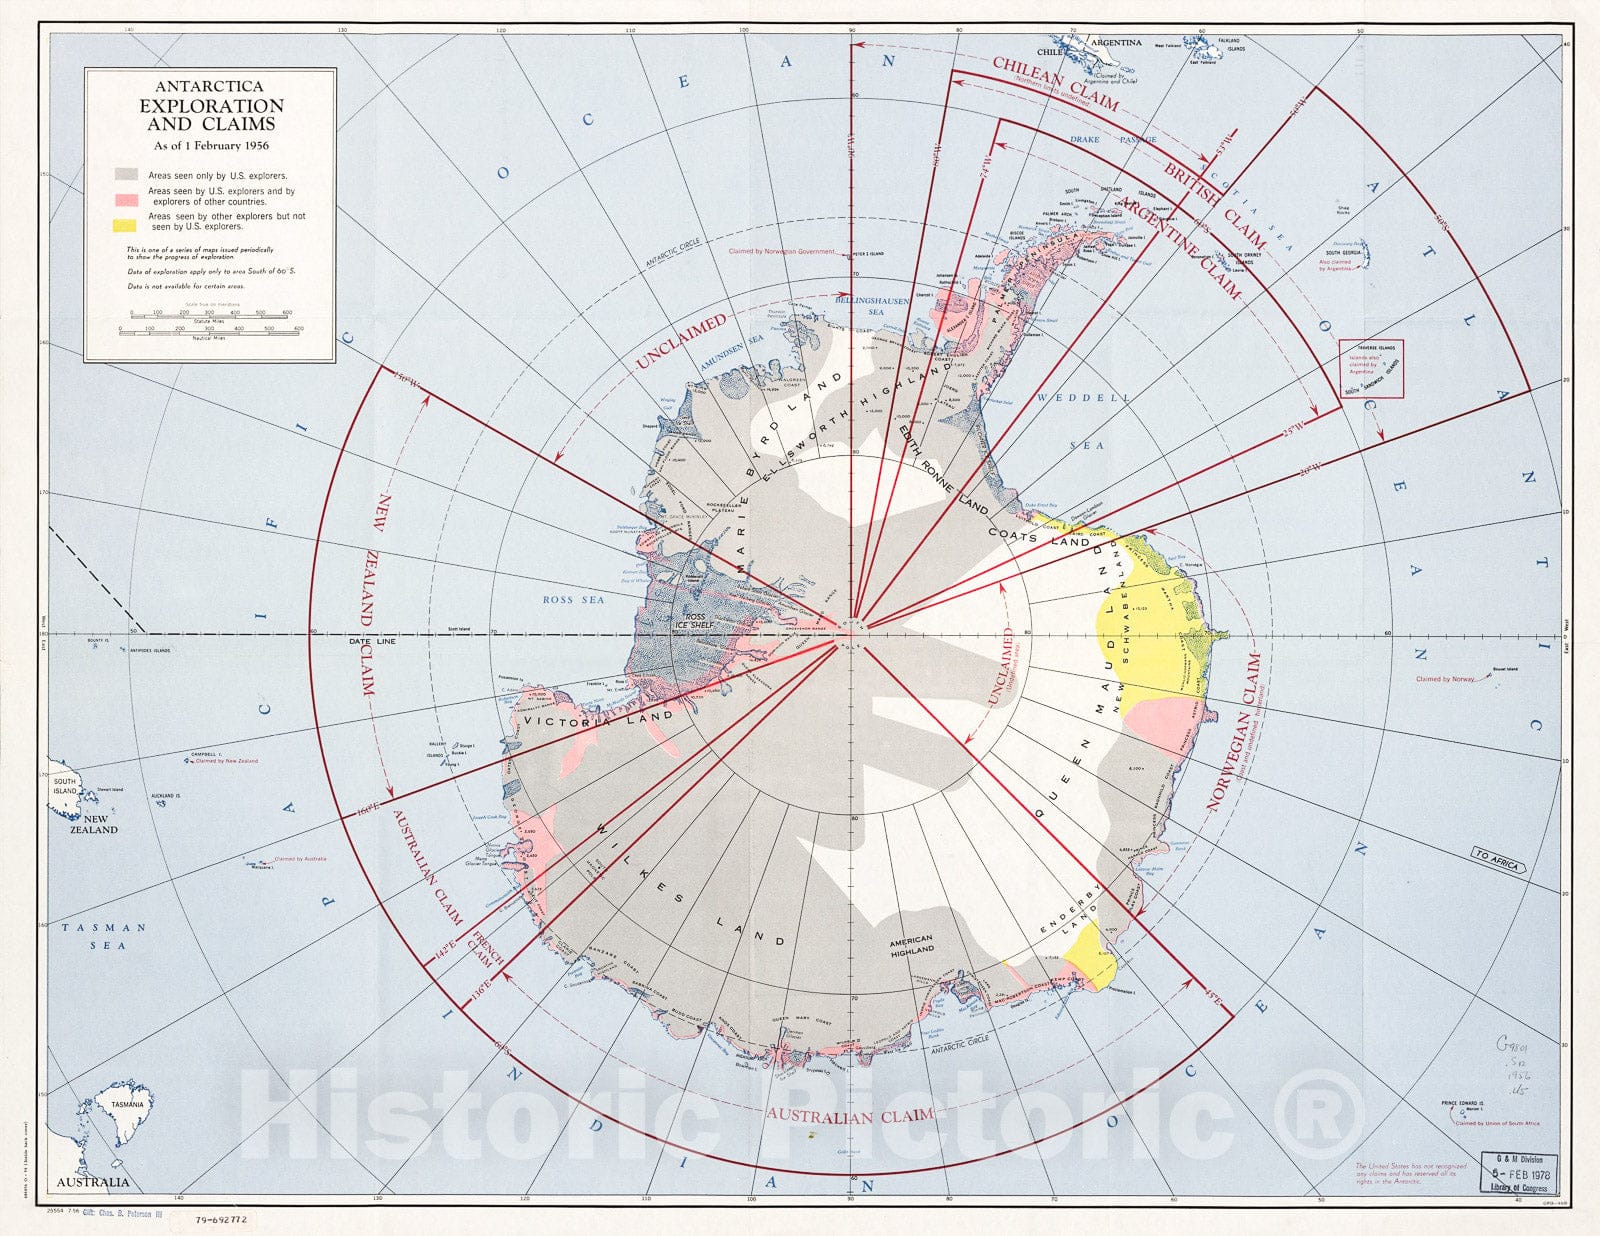 Historic 1956 Map - Antarctica Exploration and Claims, as of 1 February 1956.